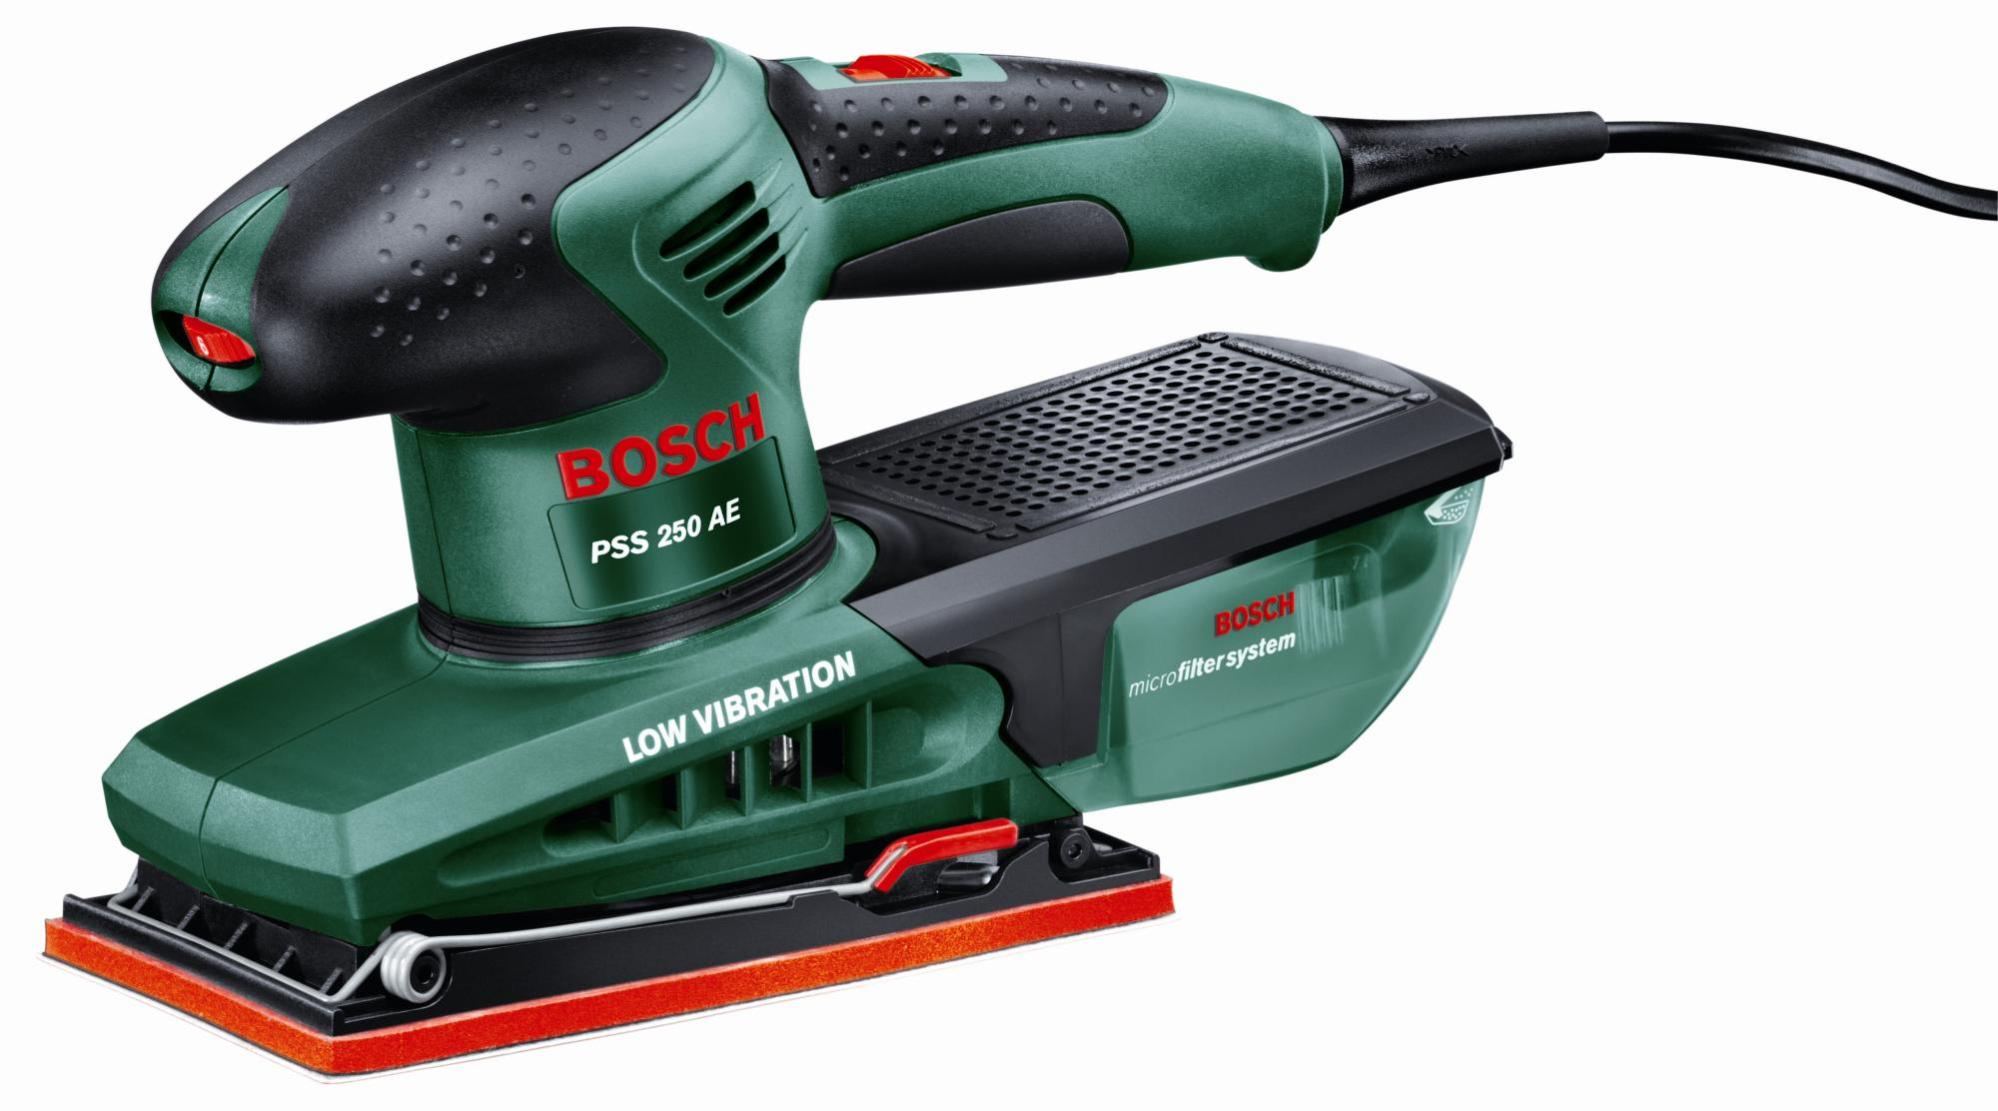 Ponceuse vibrante filaire BOSCH Pss 250ae, 250 W